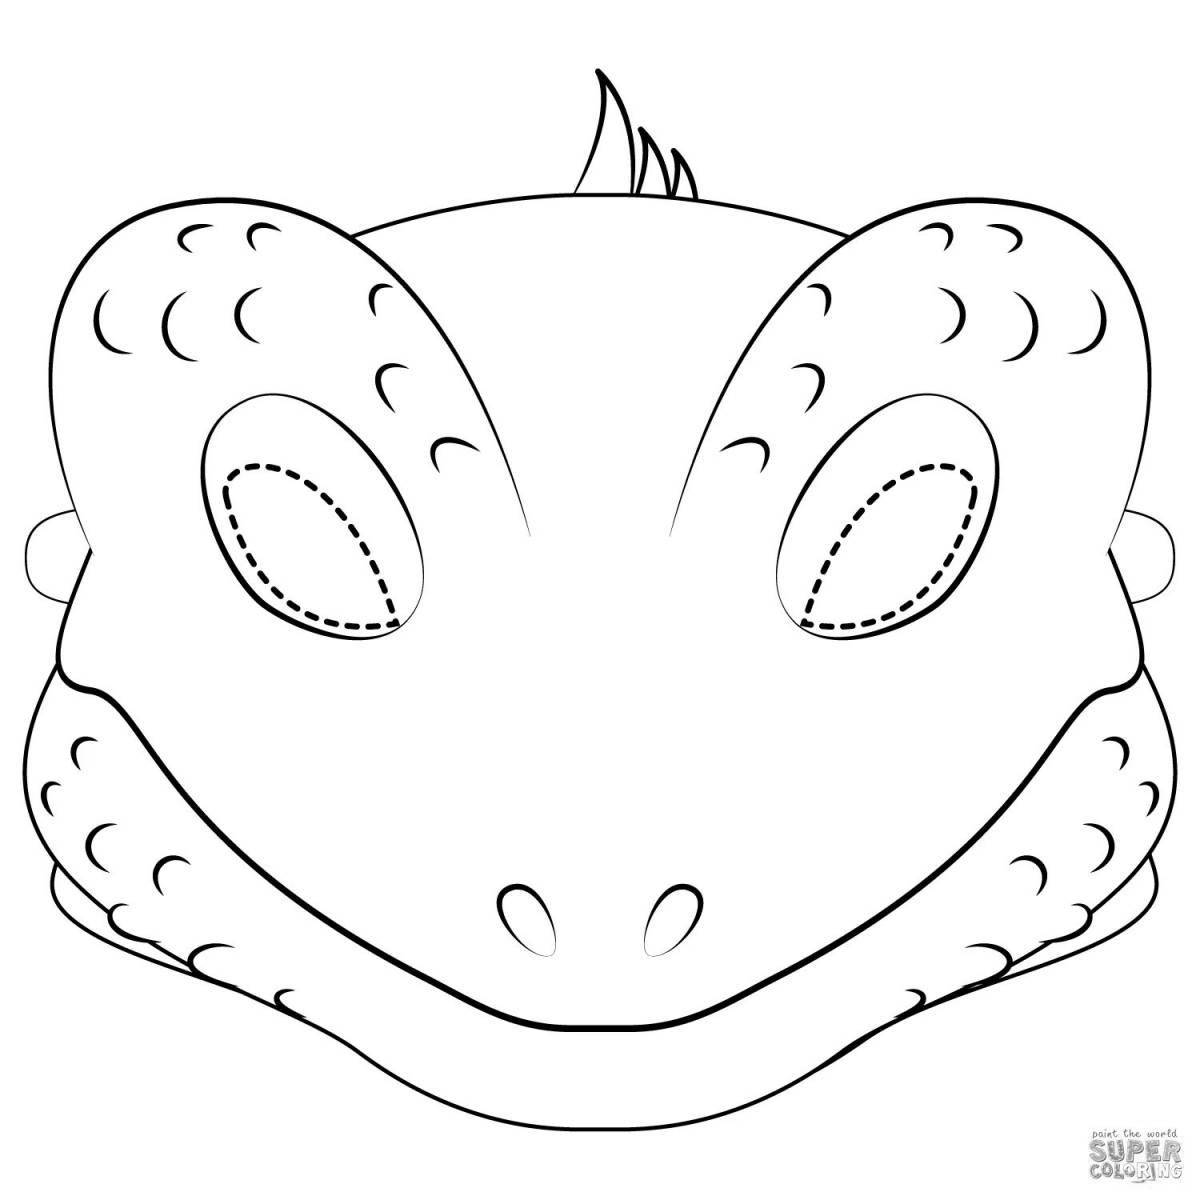 Coloring book bright animal mask